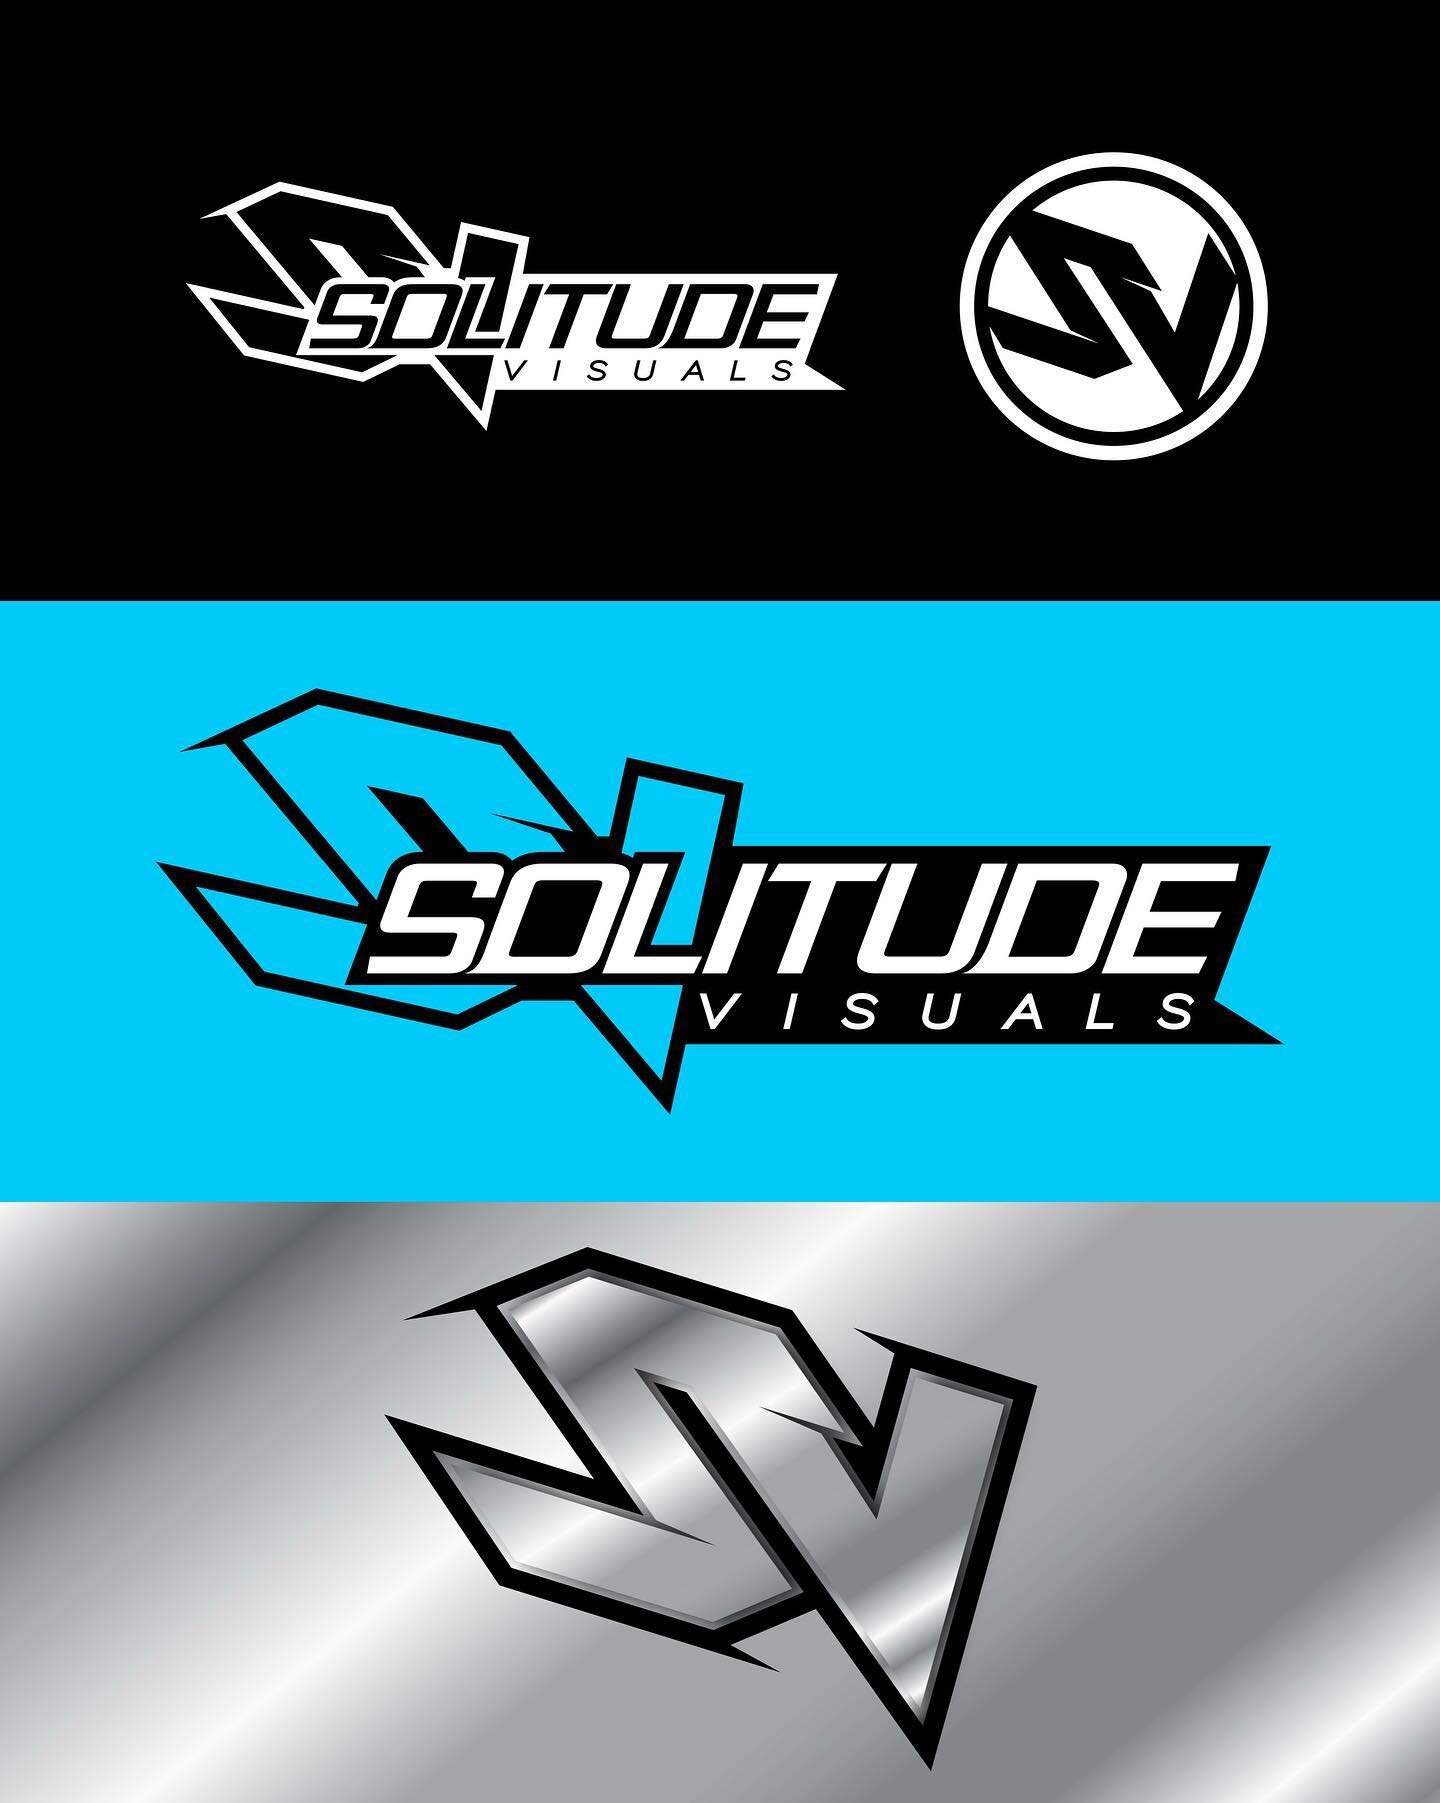 Looking to revamp your brand identity? Our company not only specializes in designing unique motocross graphics but we also help company&rsquo;s create memorable brand identities that perfectly capture the essence of your business. Let us help you sta